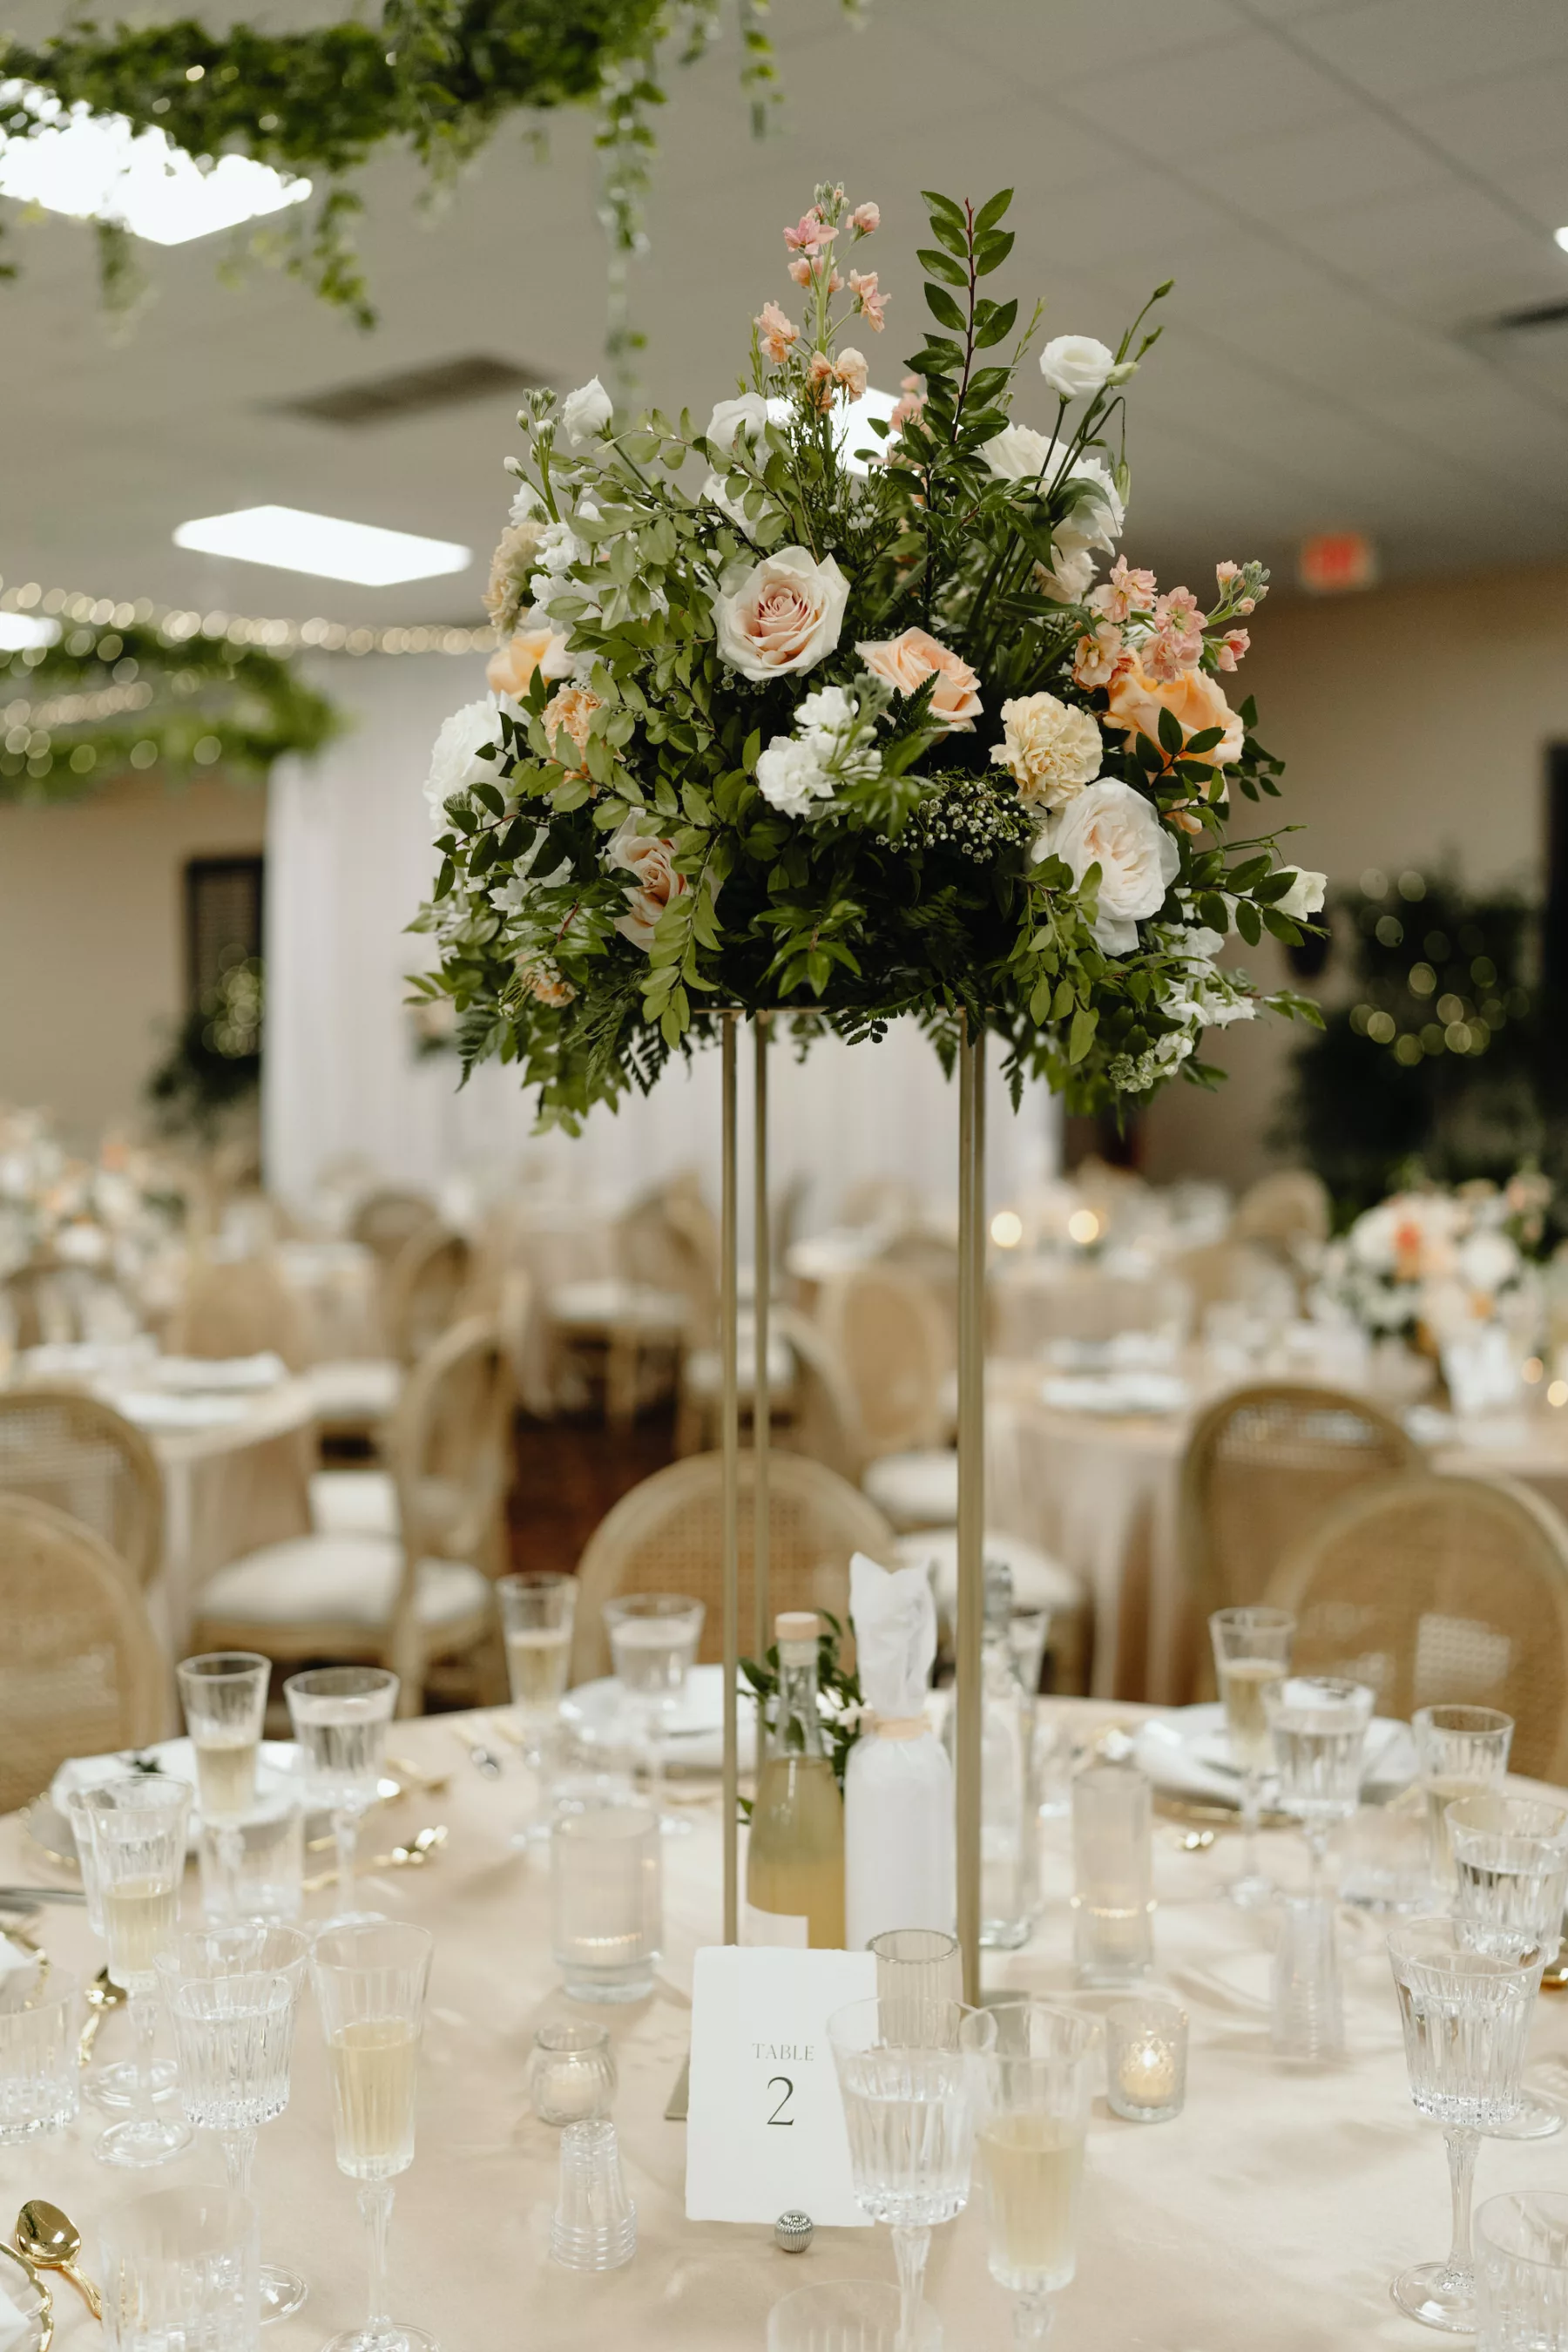 Tall Italian Inspired Gold Flower Stand with Pink and White Roses, and Greenery | Classic Neutral Wedding Ideas